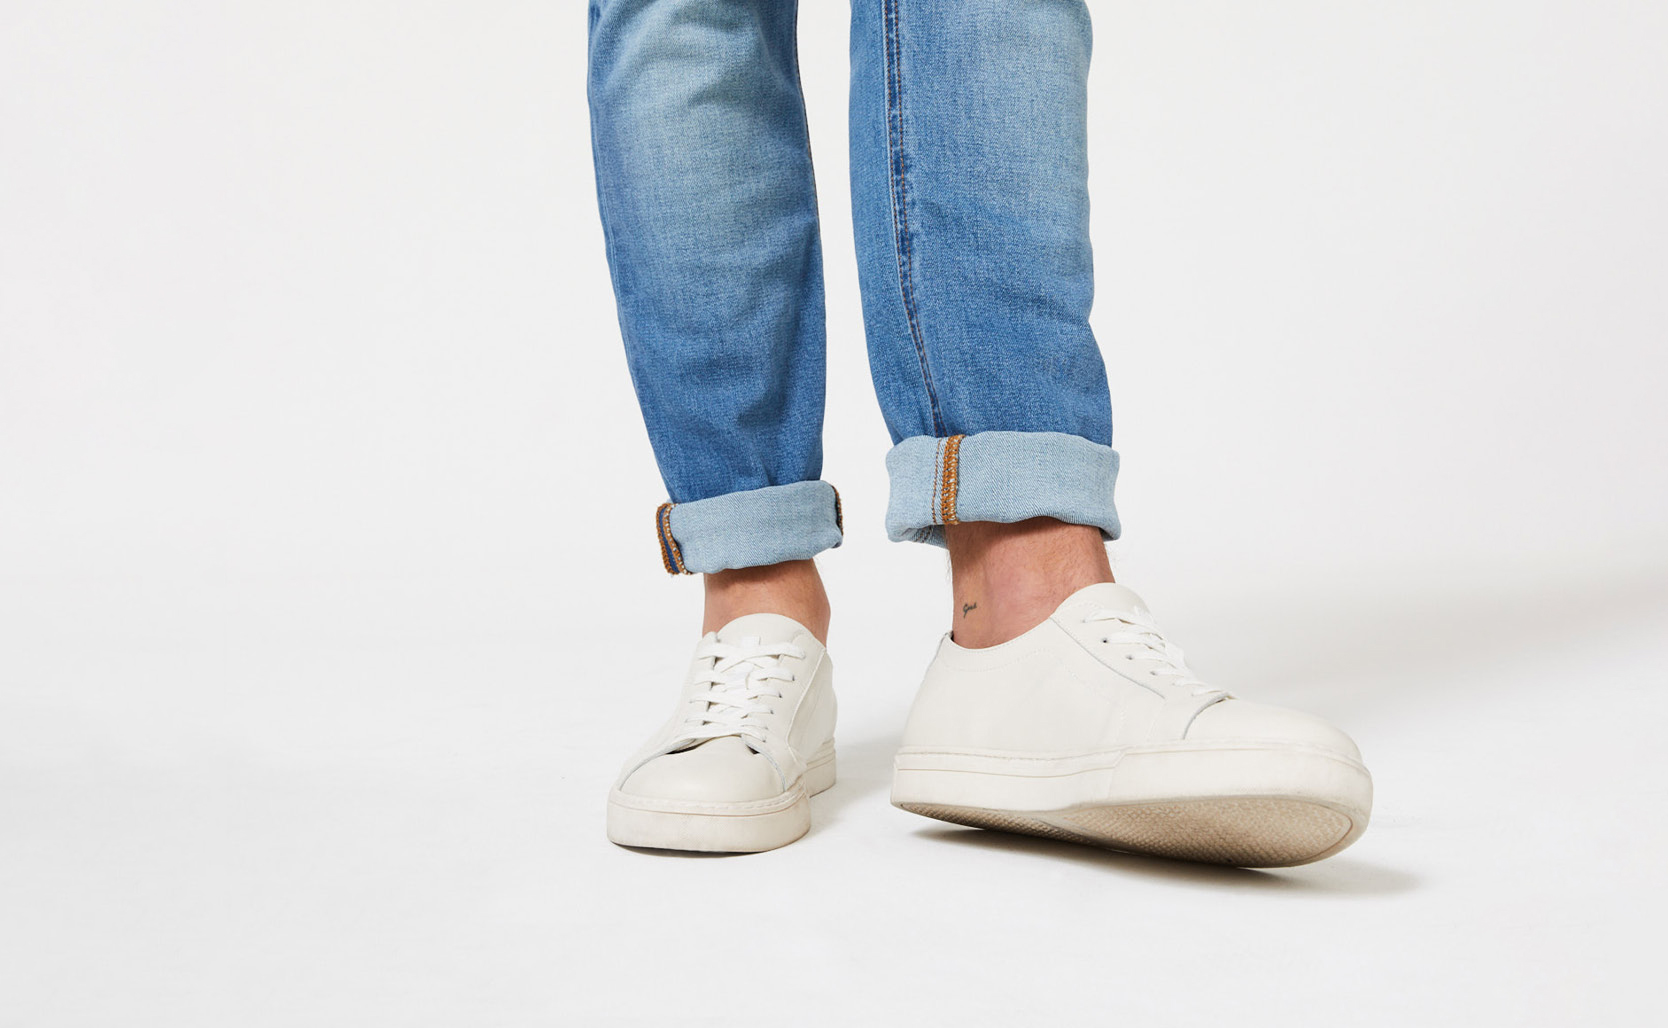 How to Cuff Jeans | Men's Guide Politix